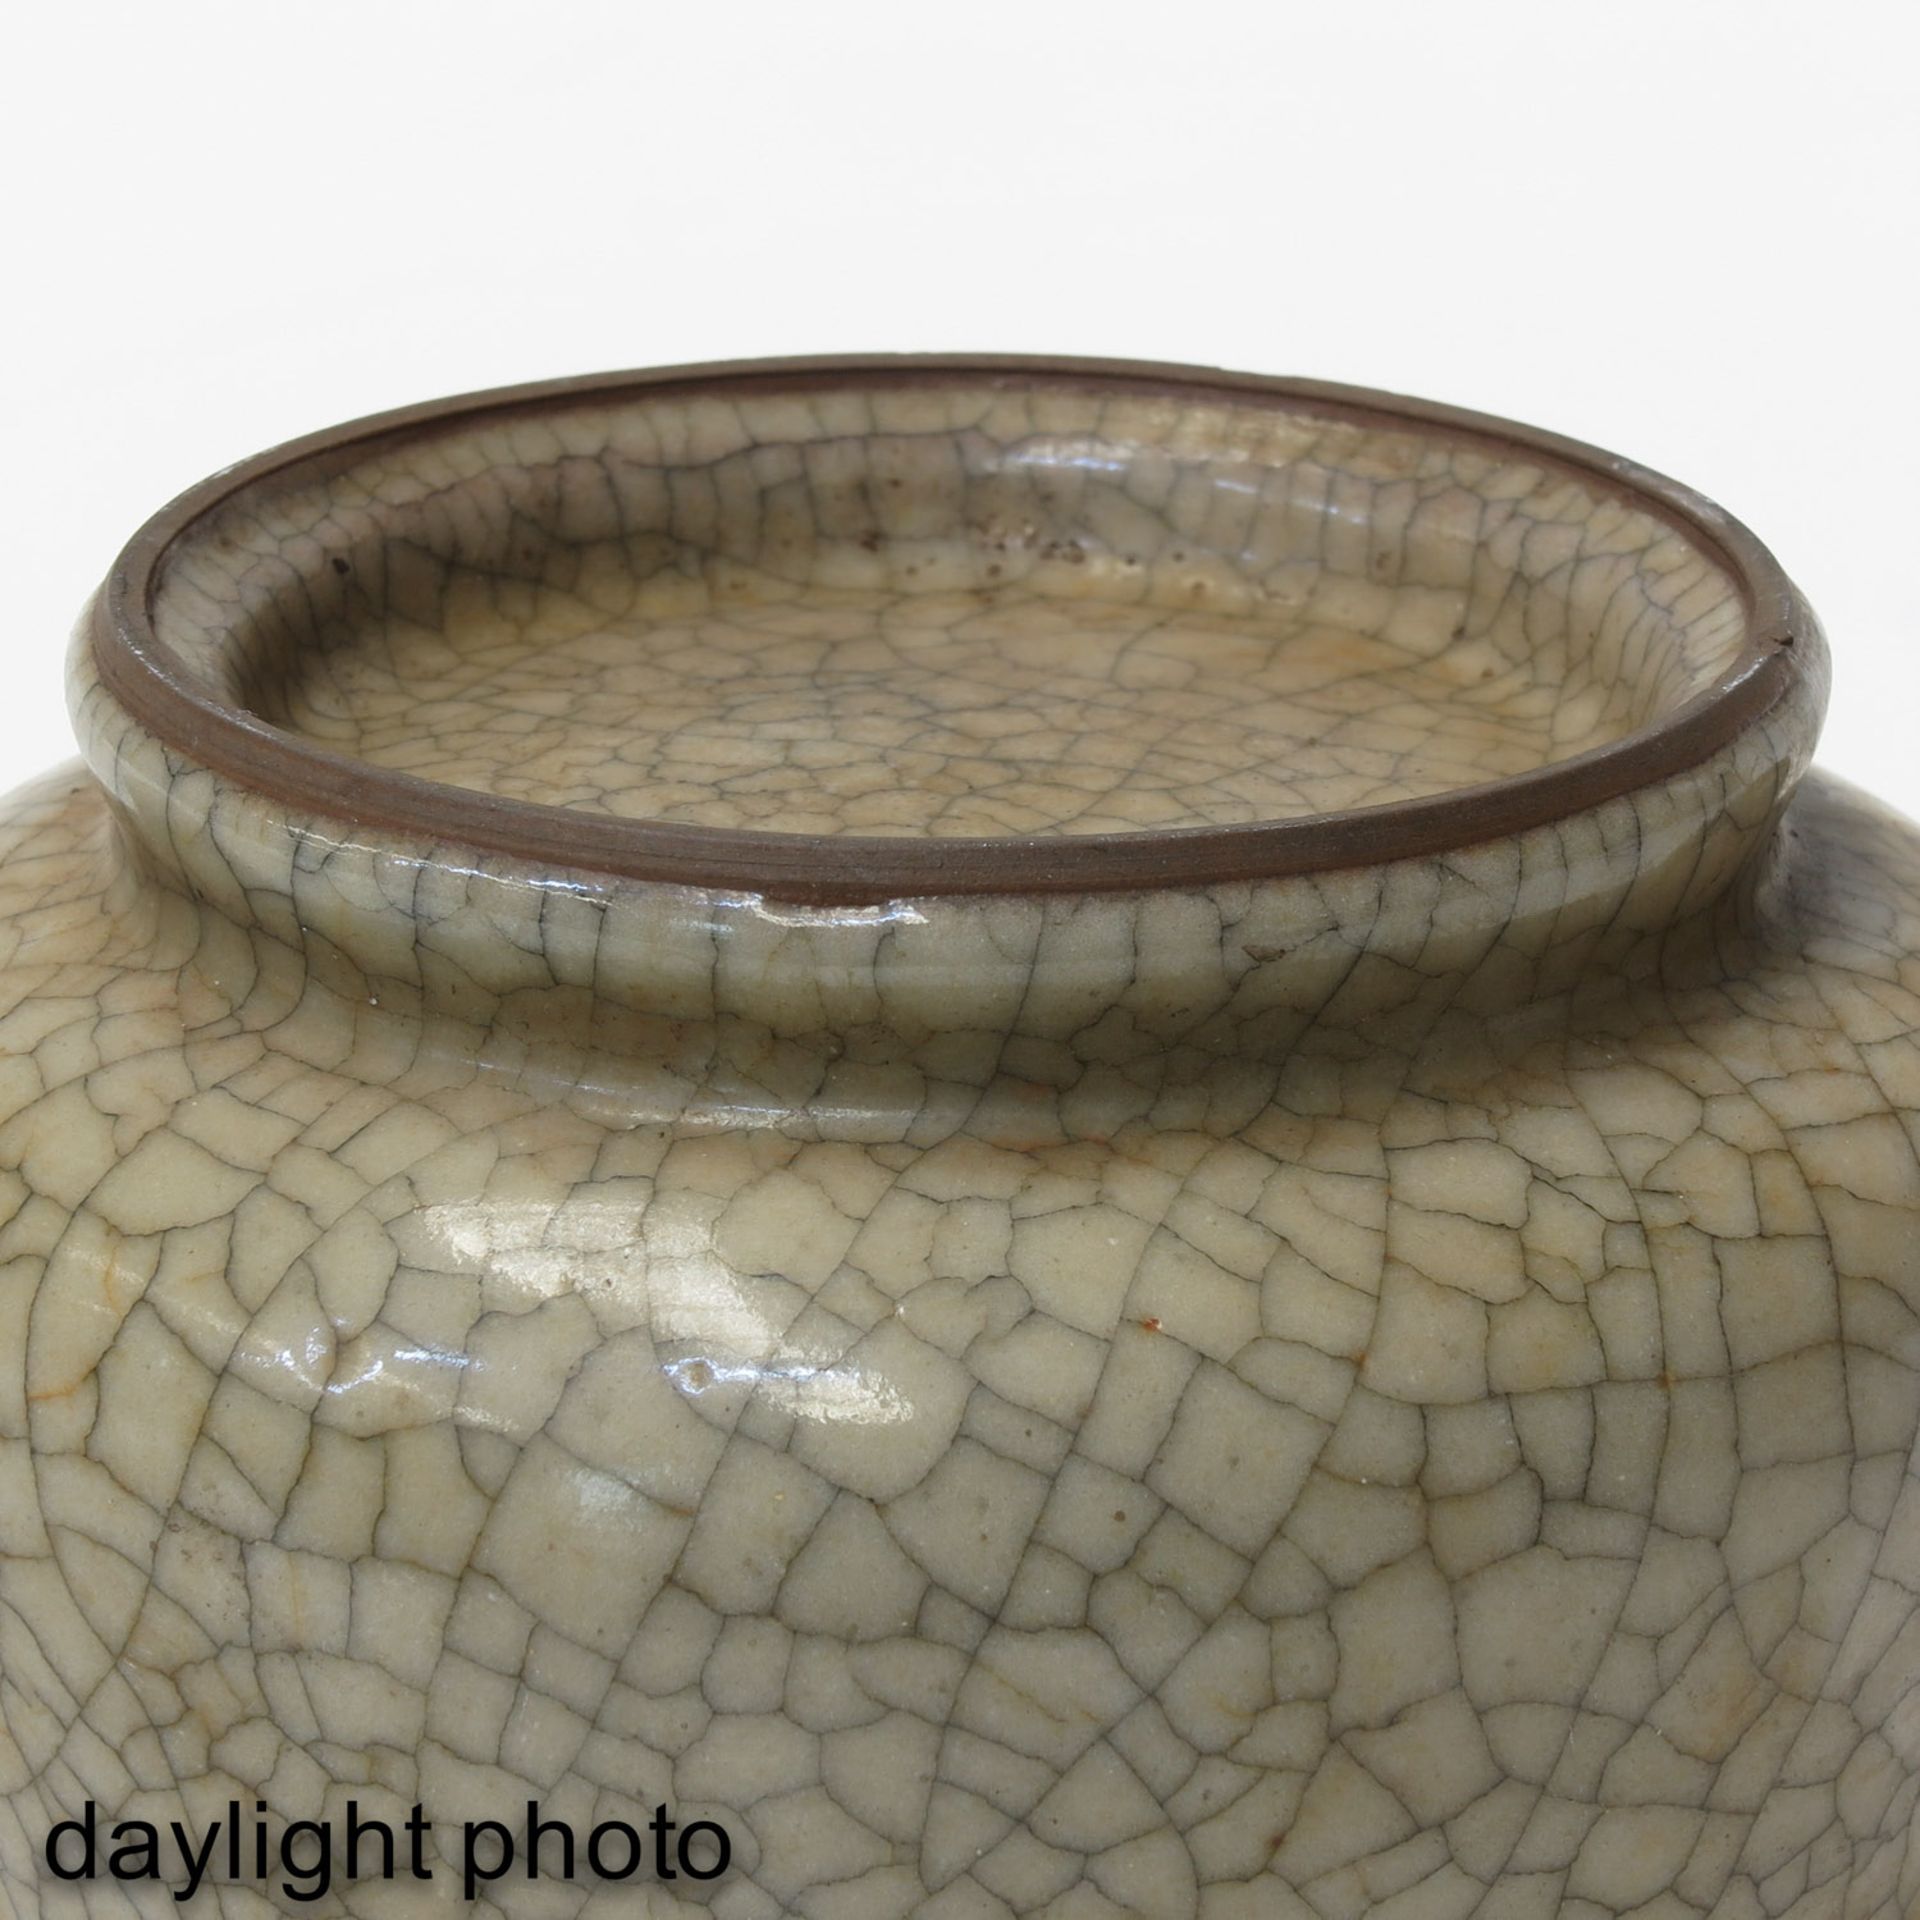 A Crackle Decor Vase with Handles - Image 8 of 9